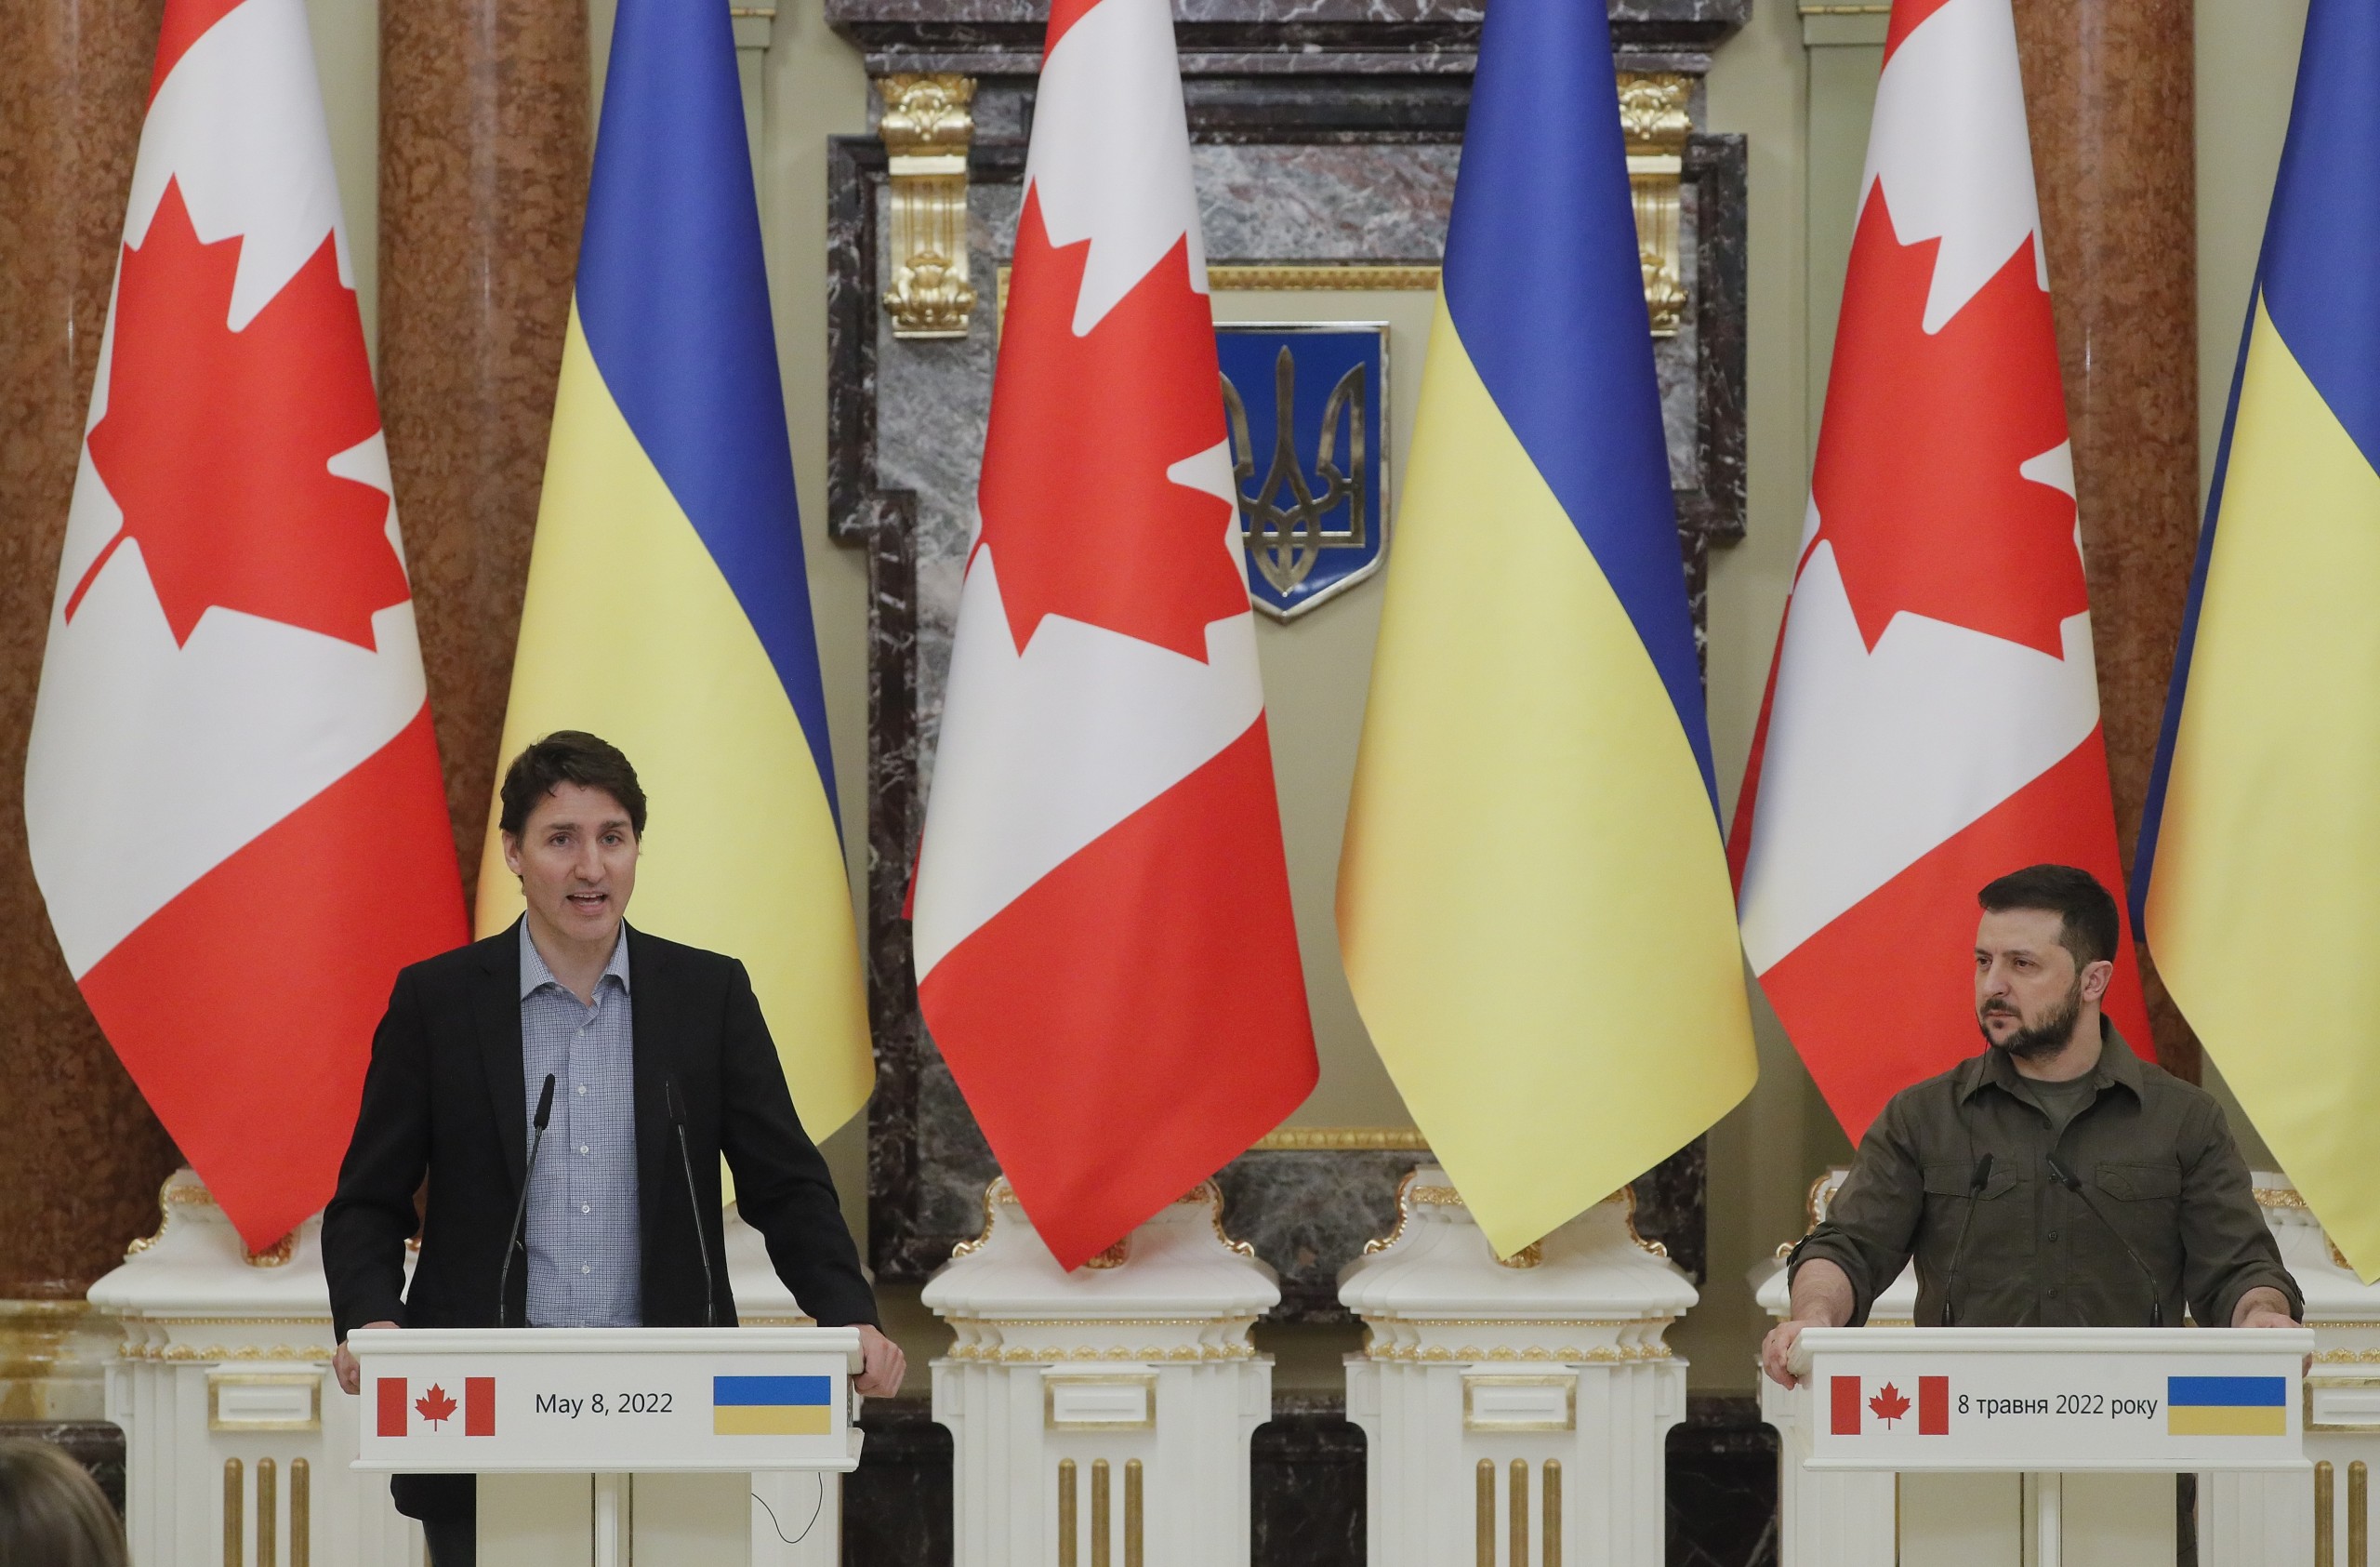 epa09934530 Ukrainian President Volodymyr Zelensky (R) and Canadian Prime Minister Justin Trudeau (L) attend their press conference at Mariinsky palace in Kyiv, Ukraine, 08 May 2022. Justin Trudeau arrived in Kyiv to meet with top Ukrainian officials amid the Russian invasion.  EPA/SERGEY DOLZHENKO